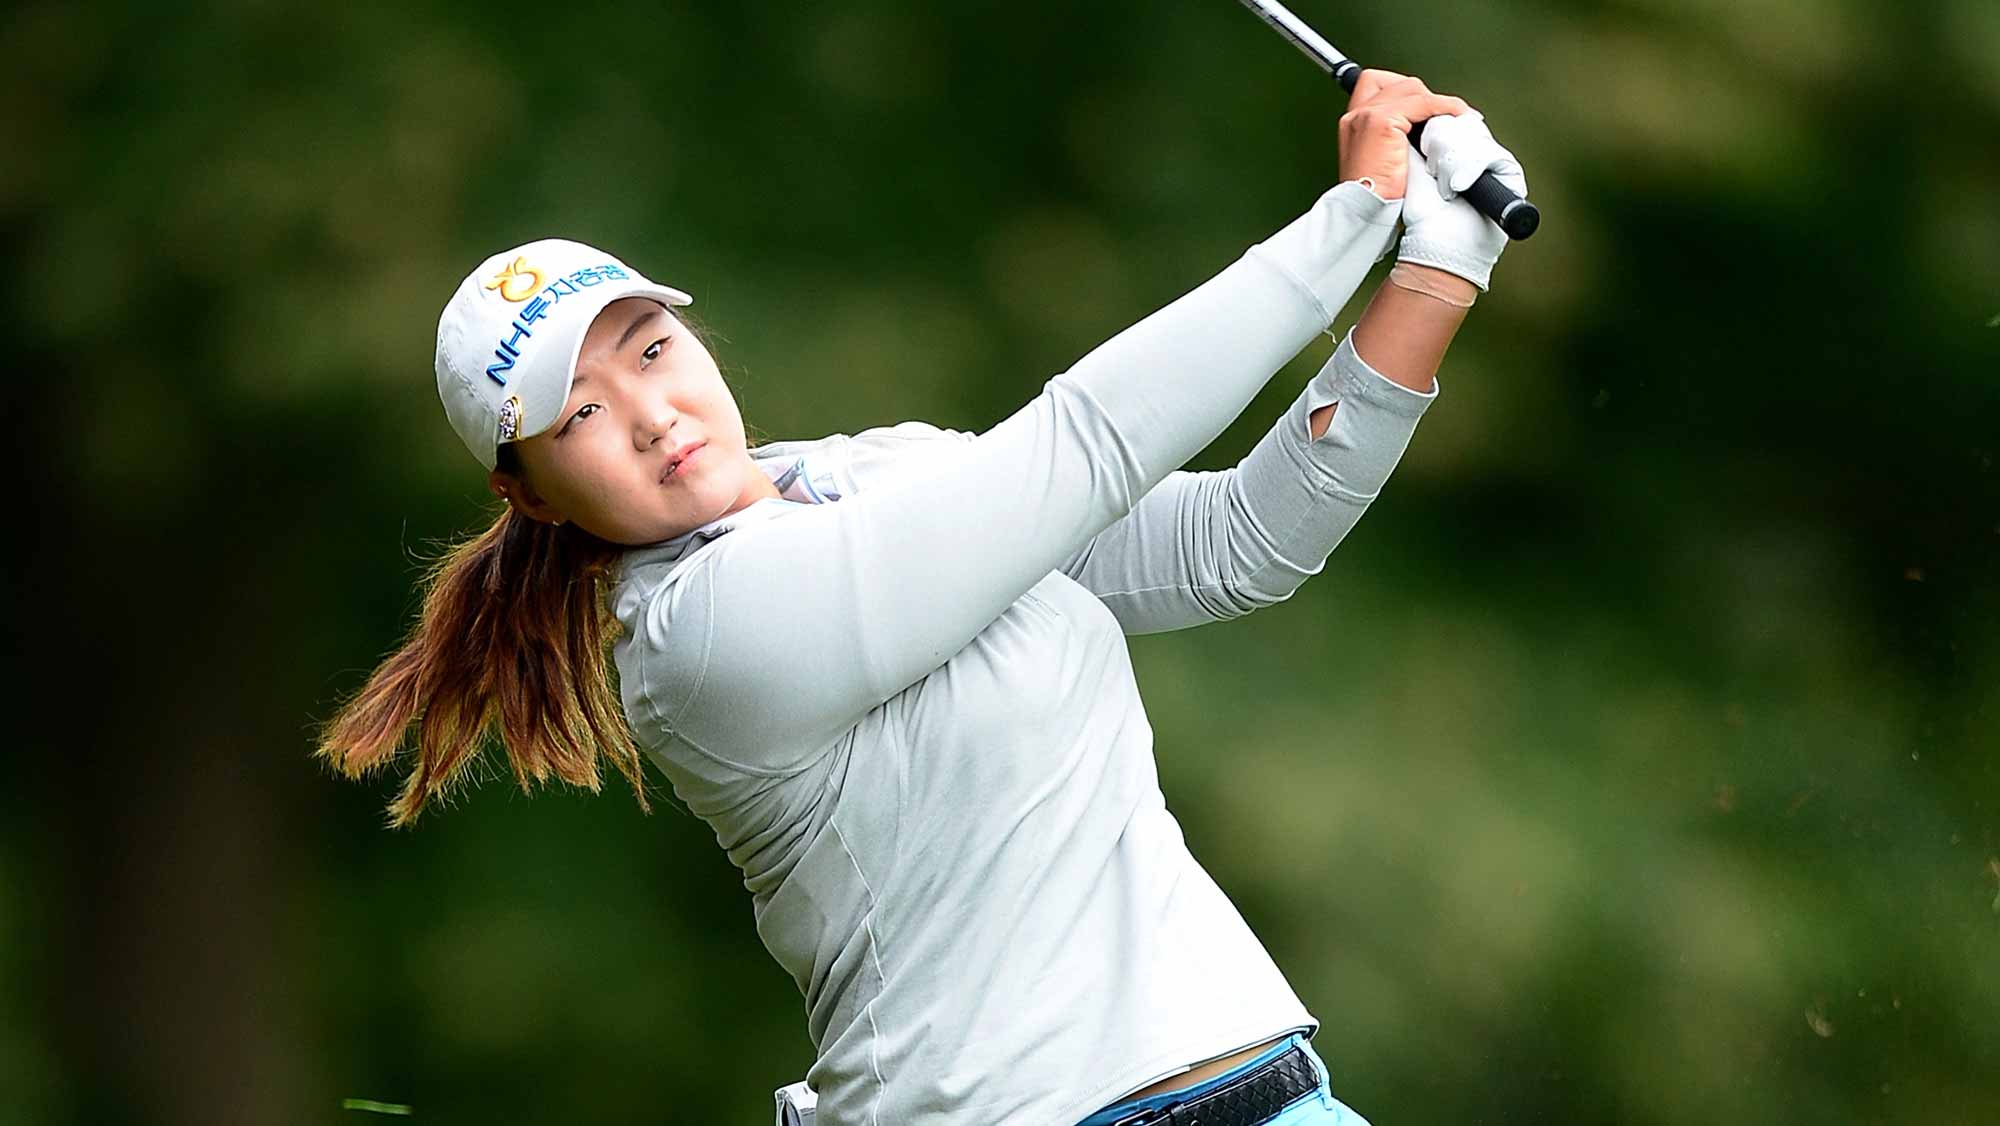 Mirim Lee of Korea hits her second shot on the 1st hole during the final round of the Ricoh Women's British Open at Woburn Golf Club